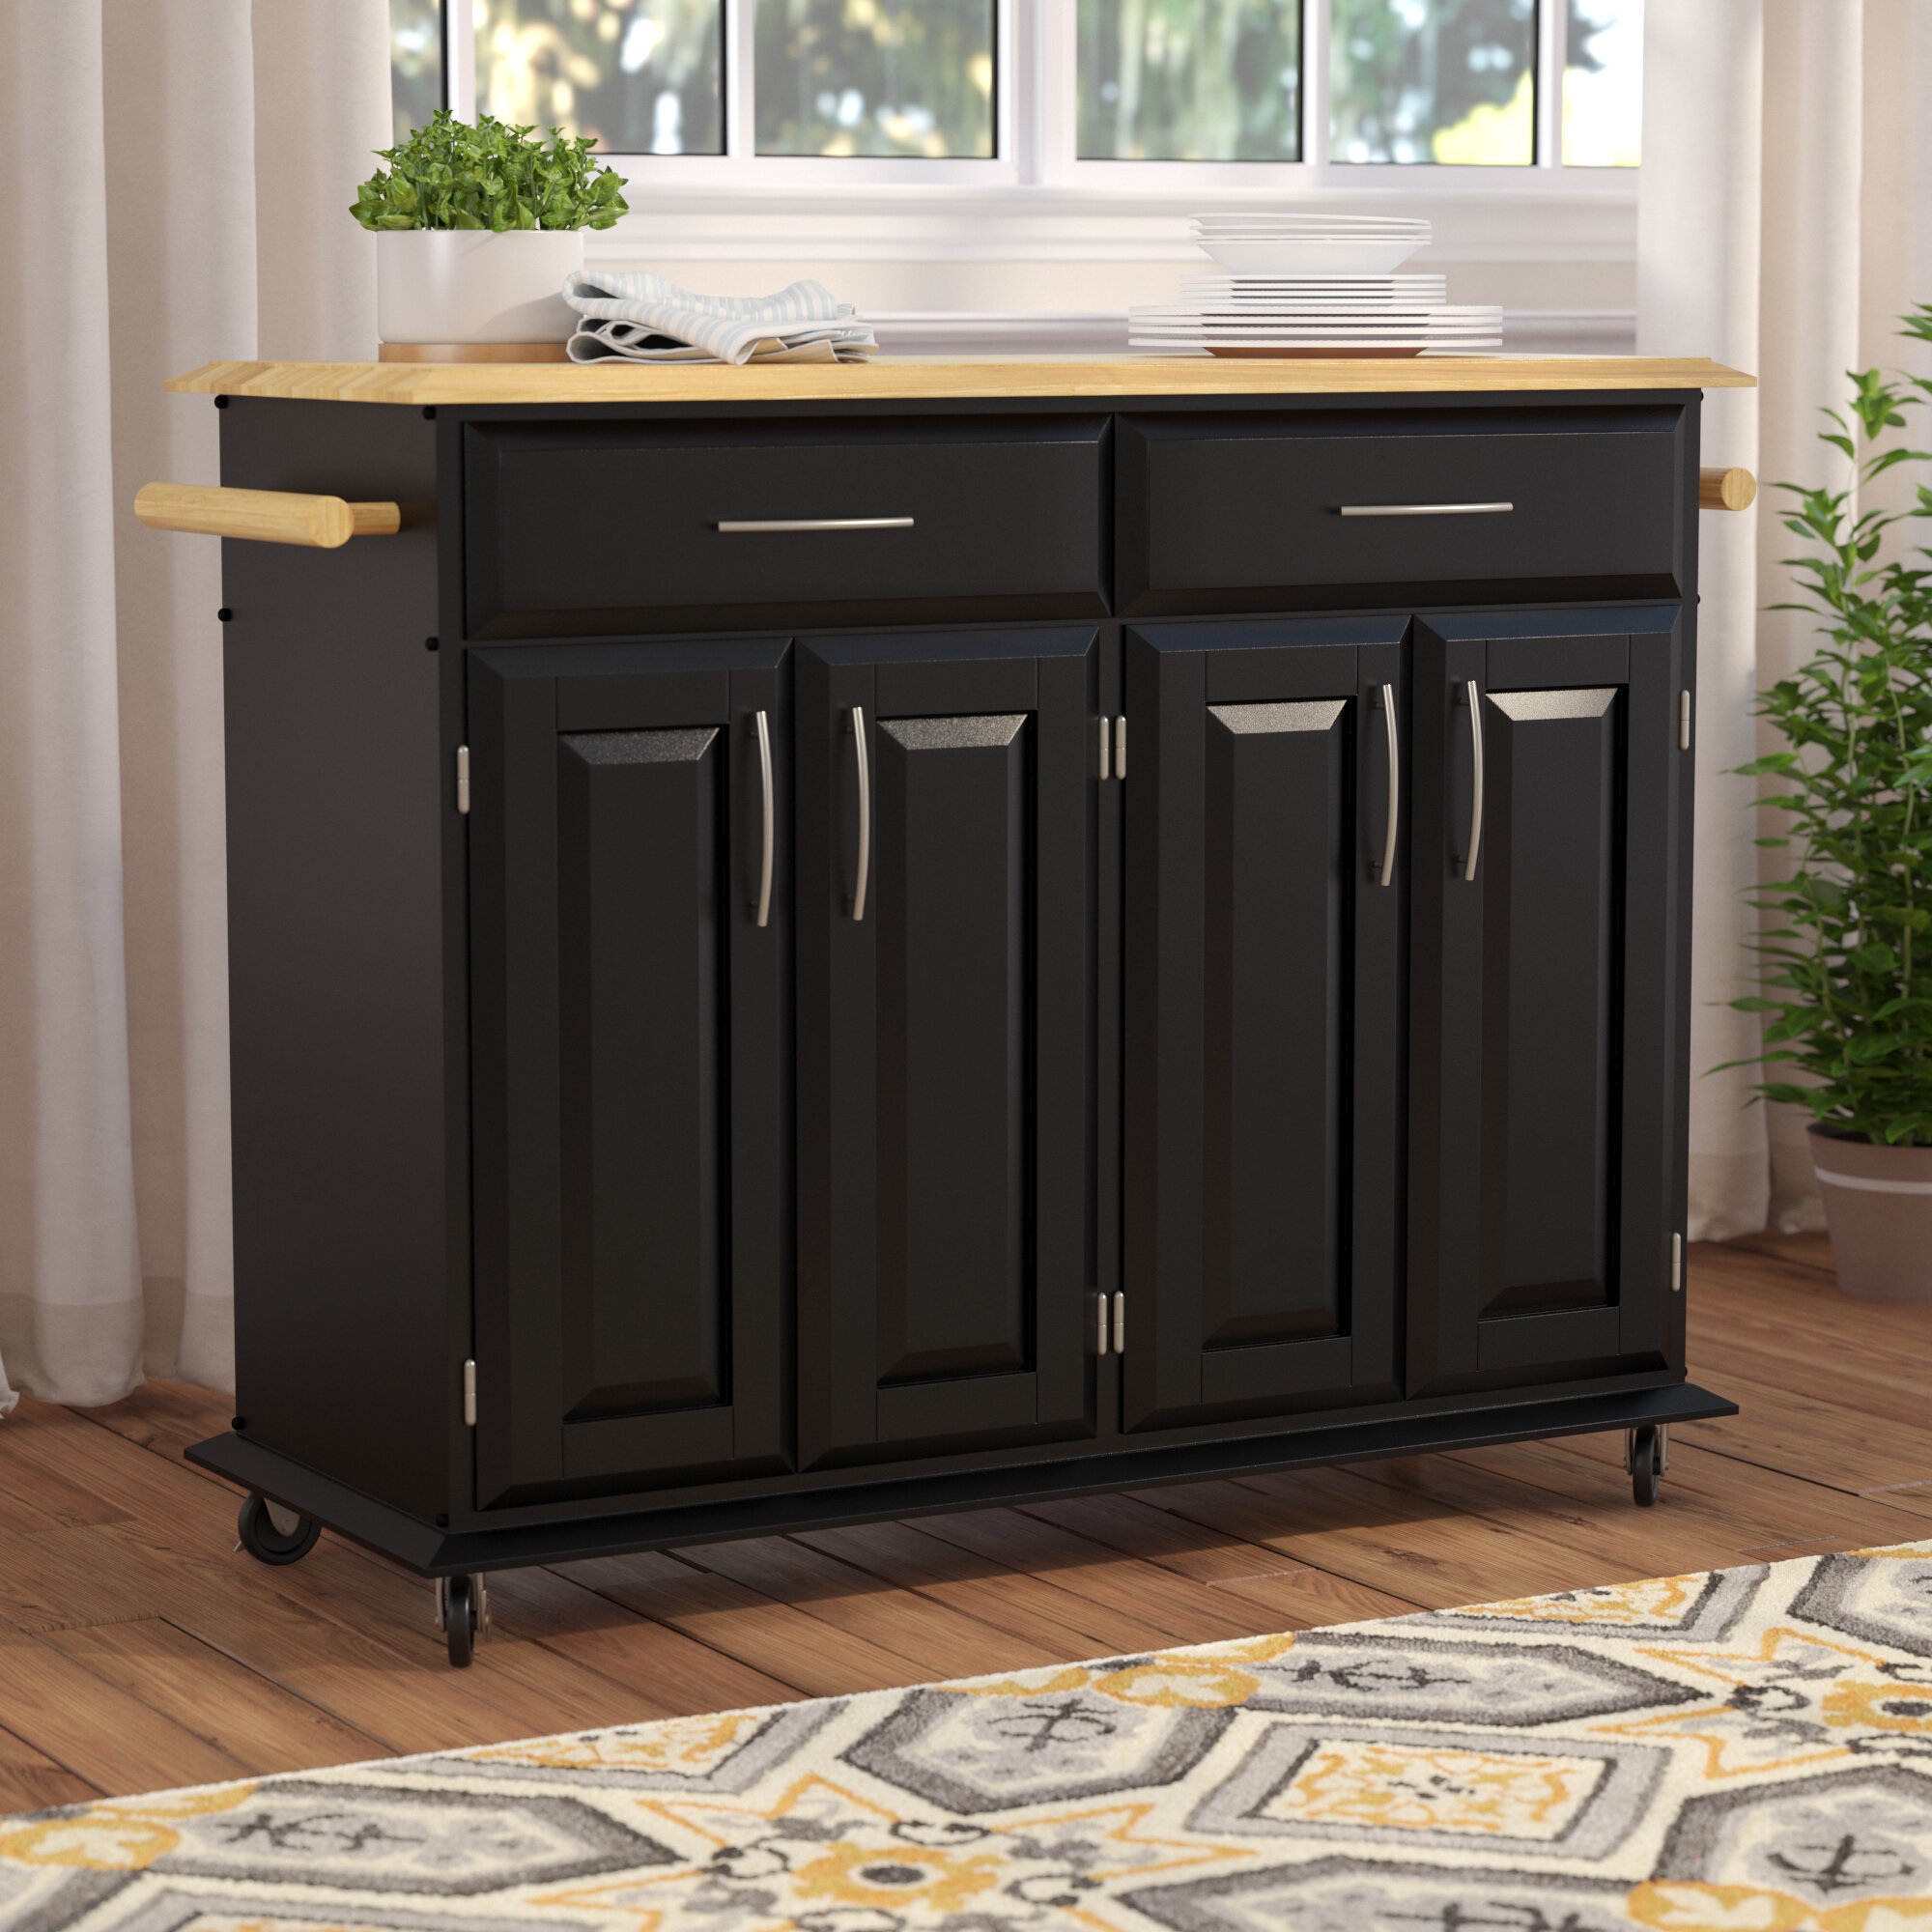 Charlton Home Hamilton Kitchen Island With Wood Top Reviews